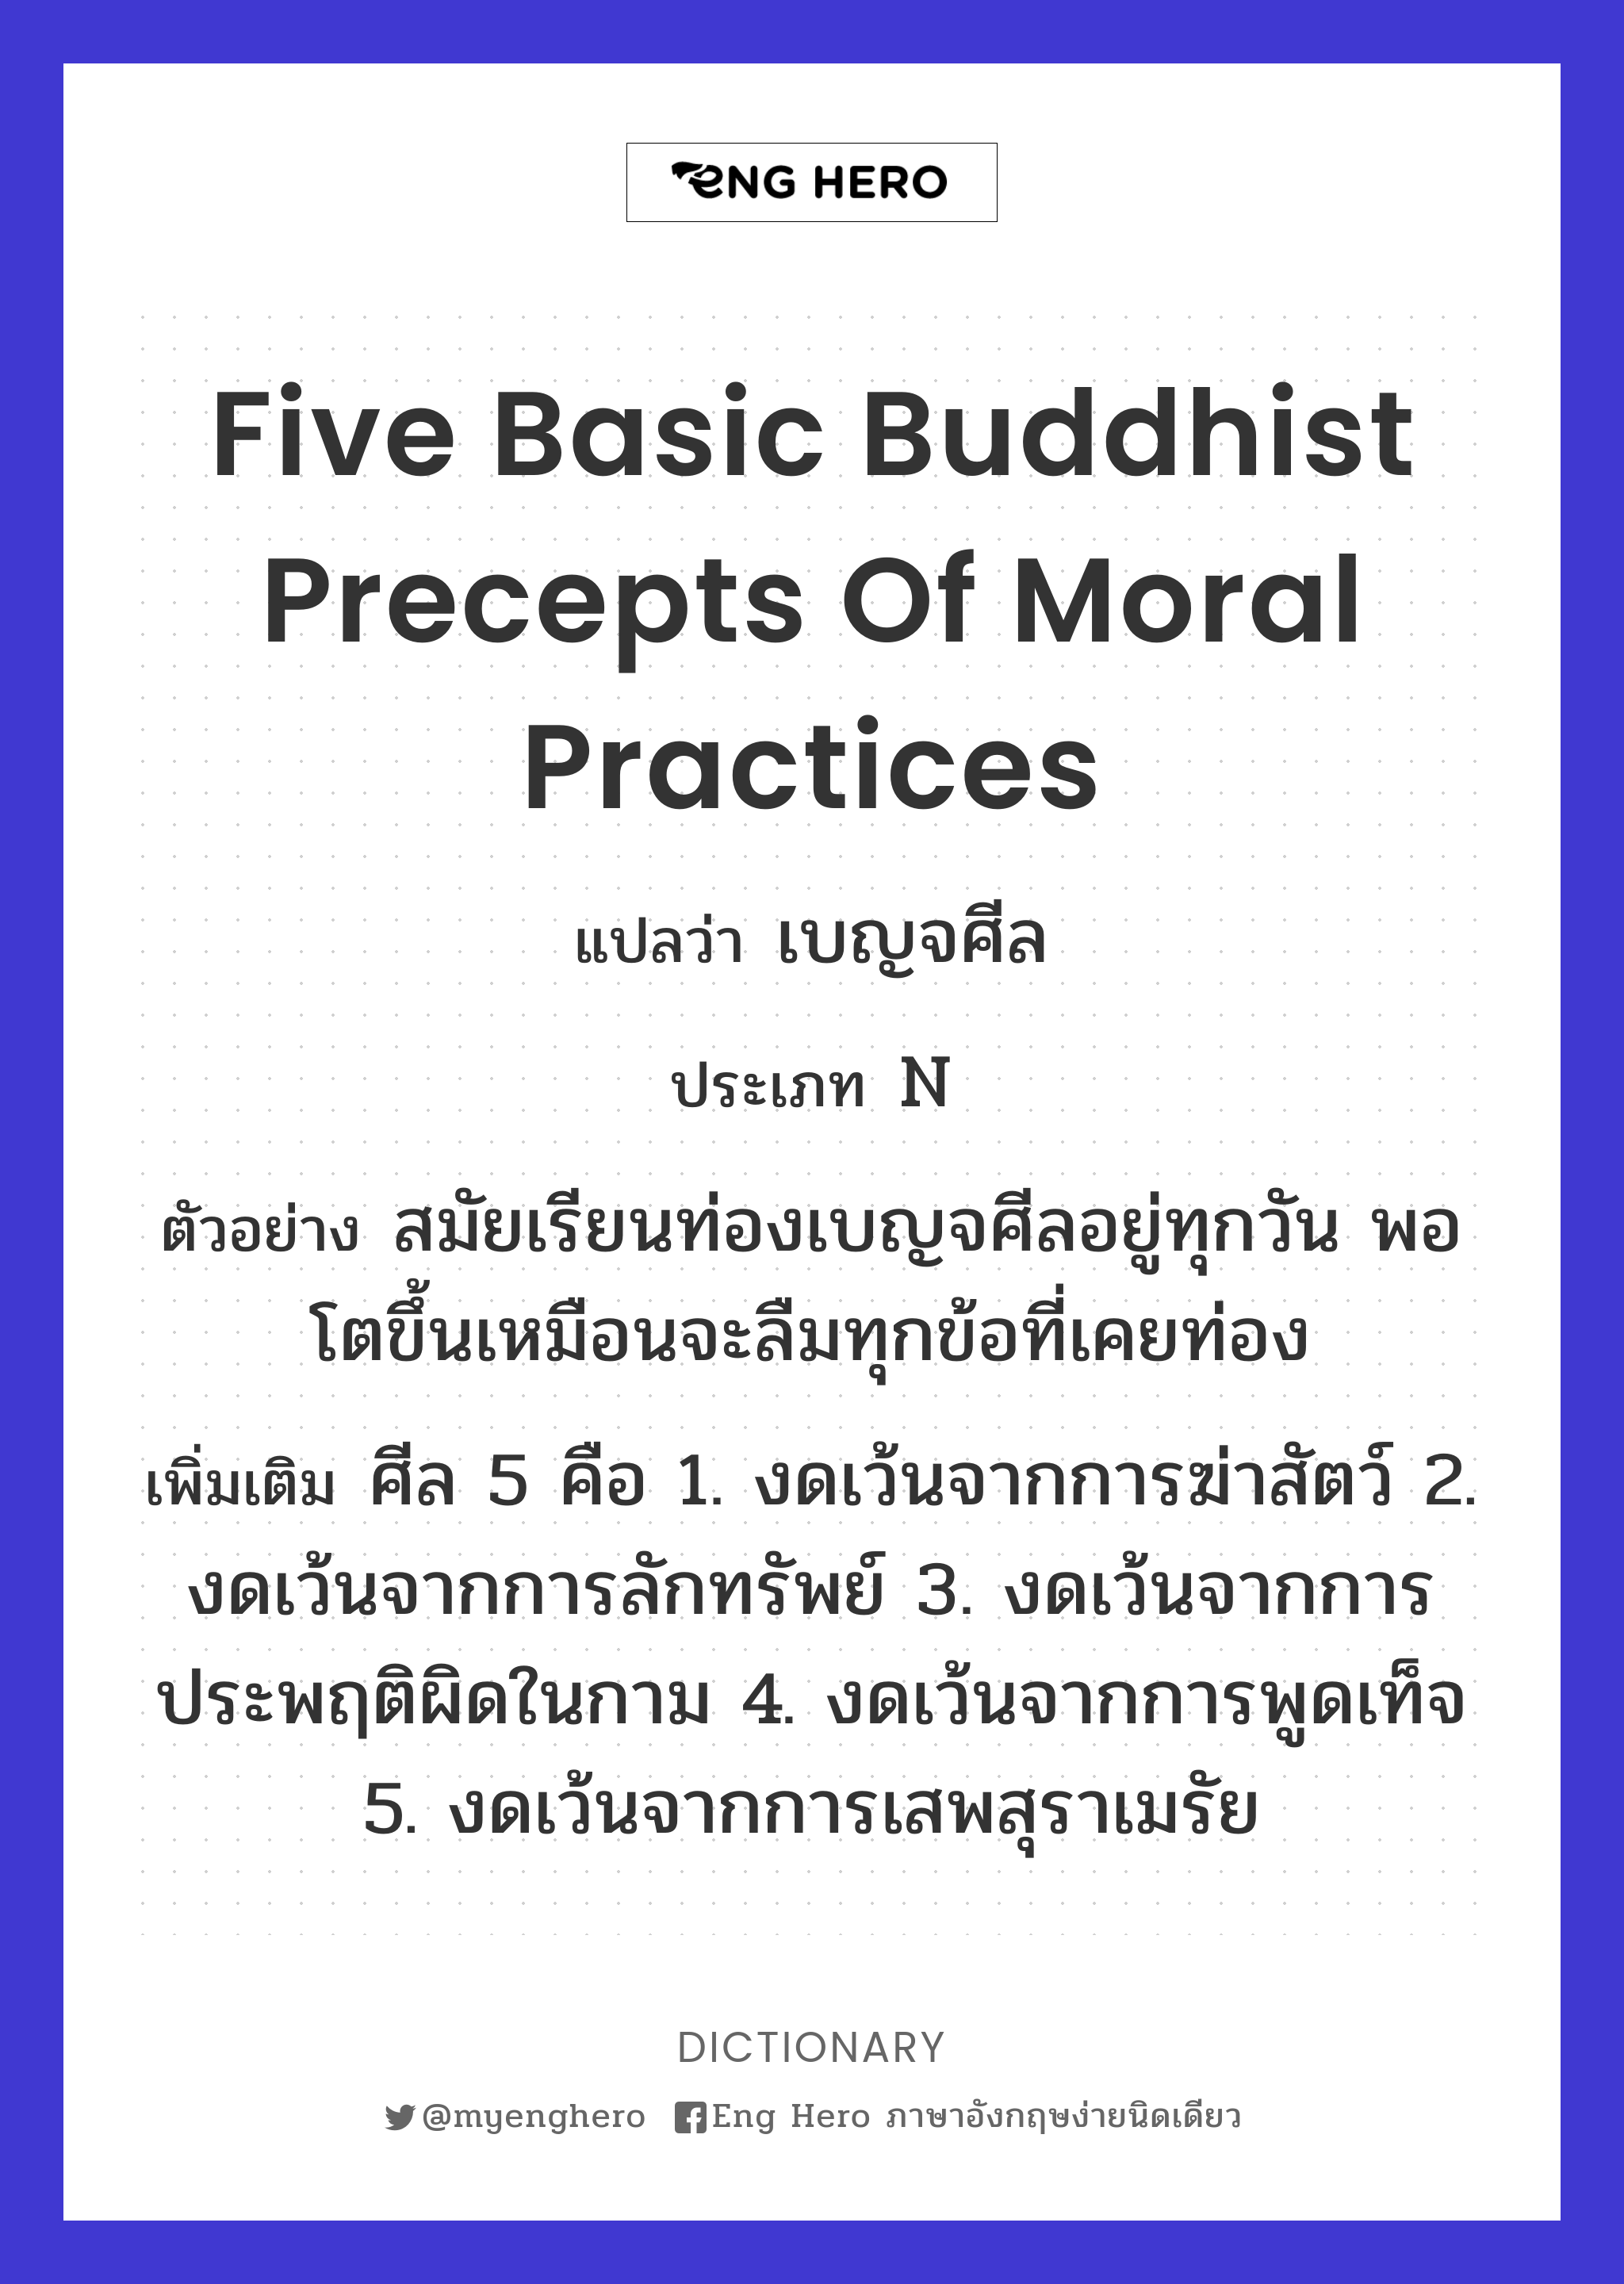 five basic Buddhist precepts of moral practices